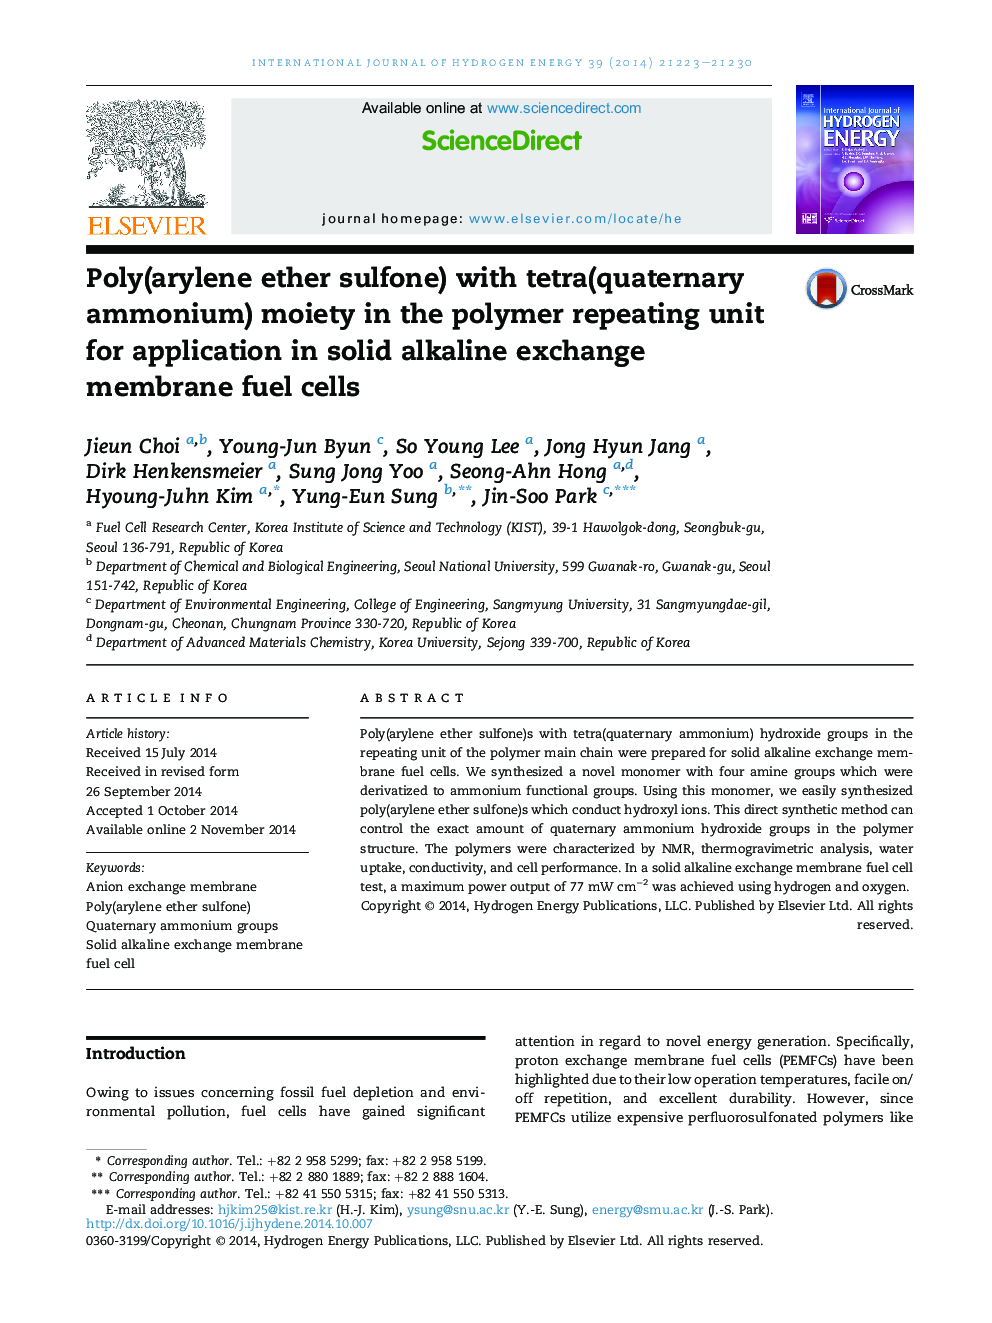 Poly(arylene ether sulfone) with tetra(quaternary ammonium) moiety in the polymer repeating unit for application in solid alkaline exchange membrane fuel cells